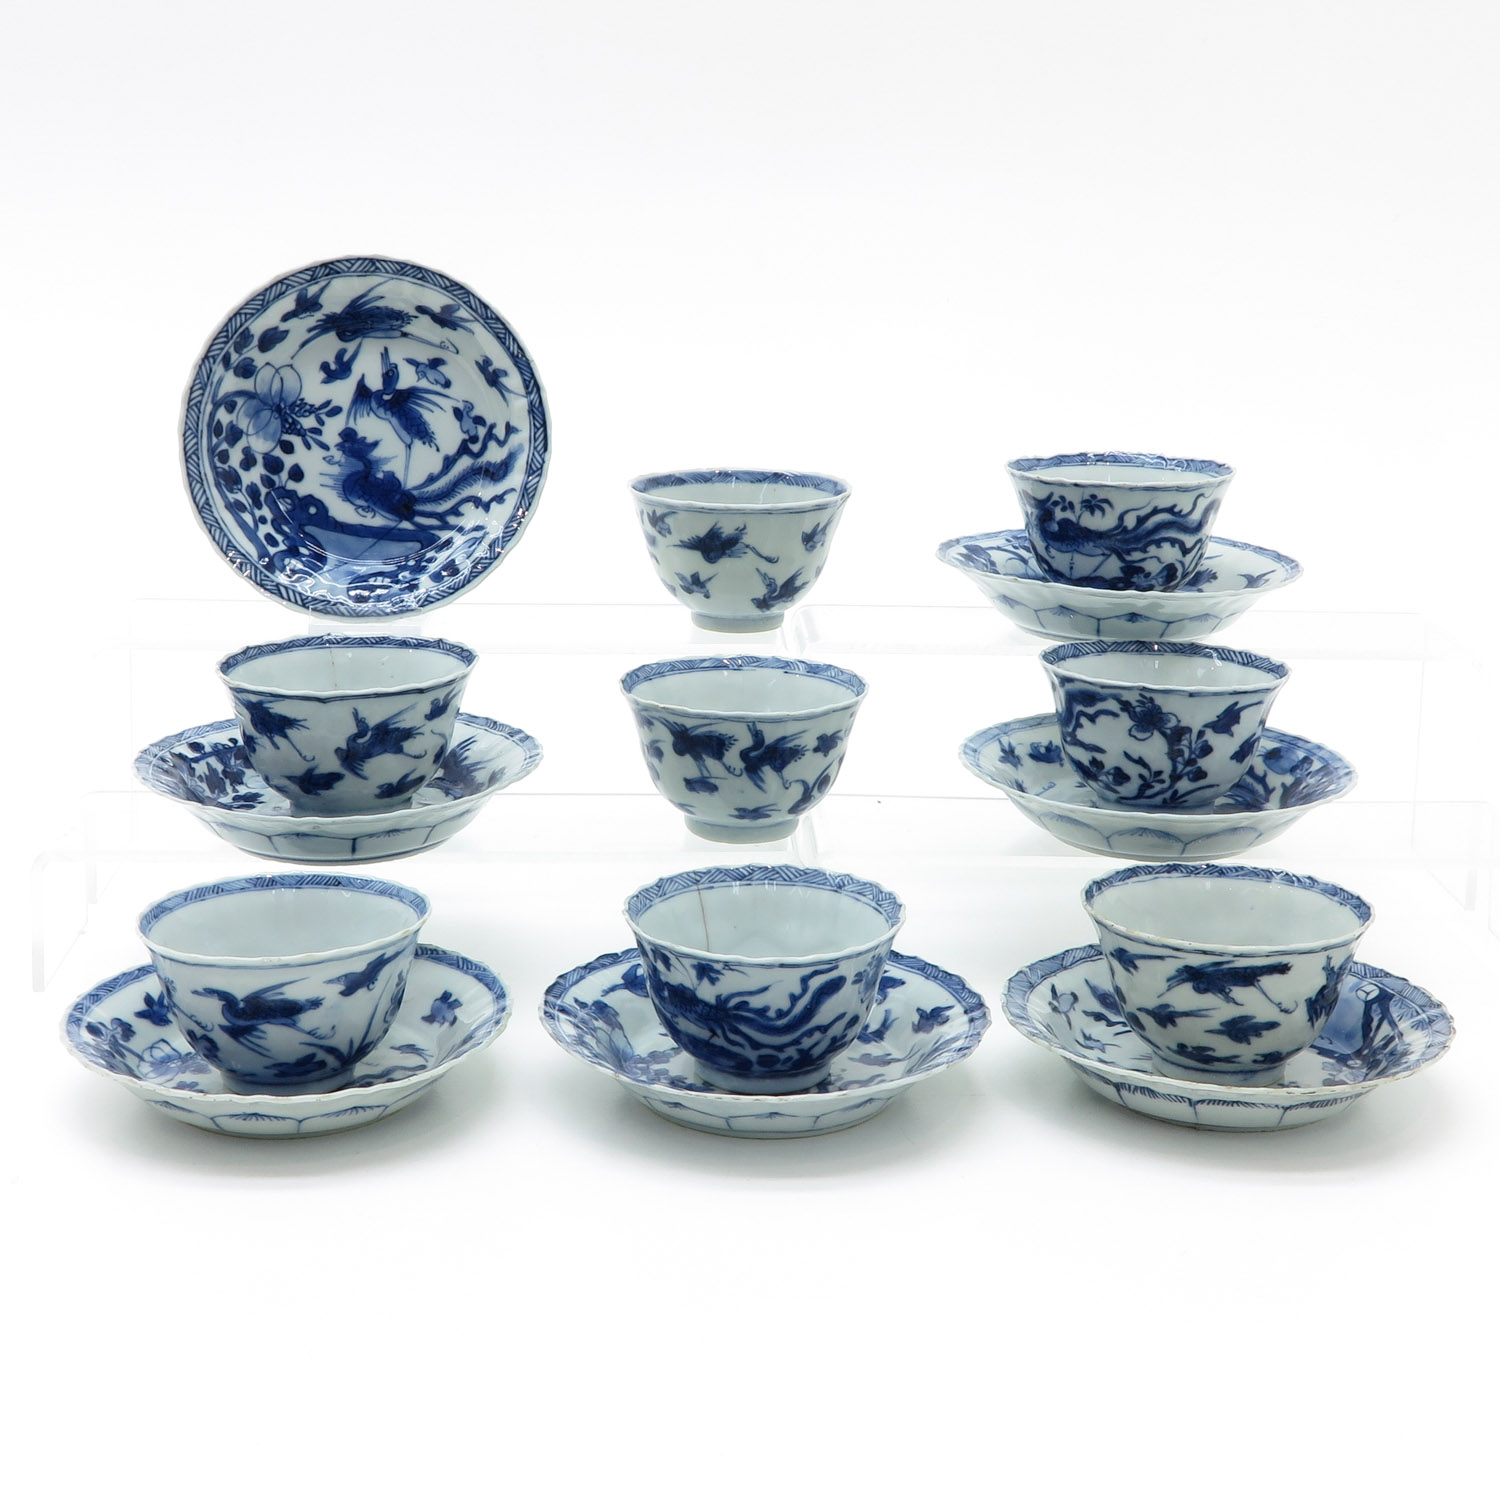 A Series of Cups and Saucers